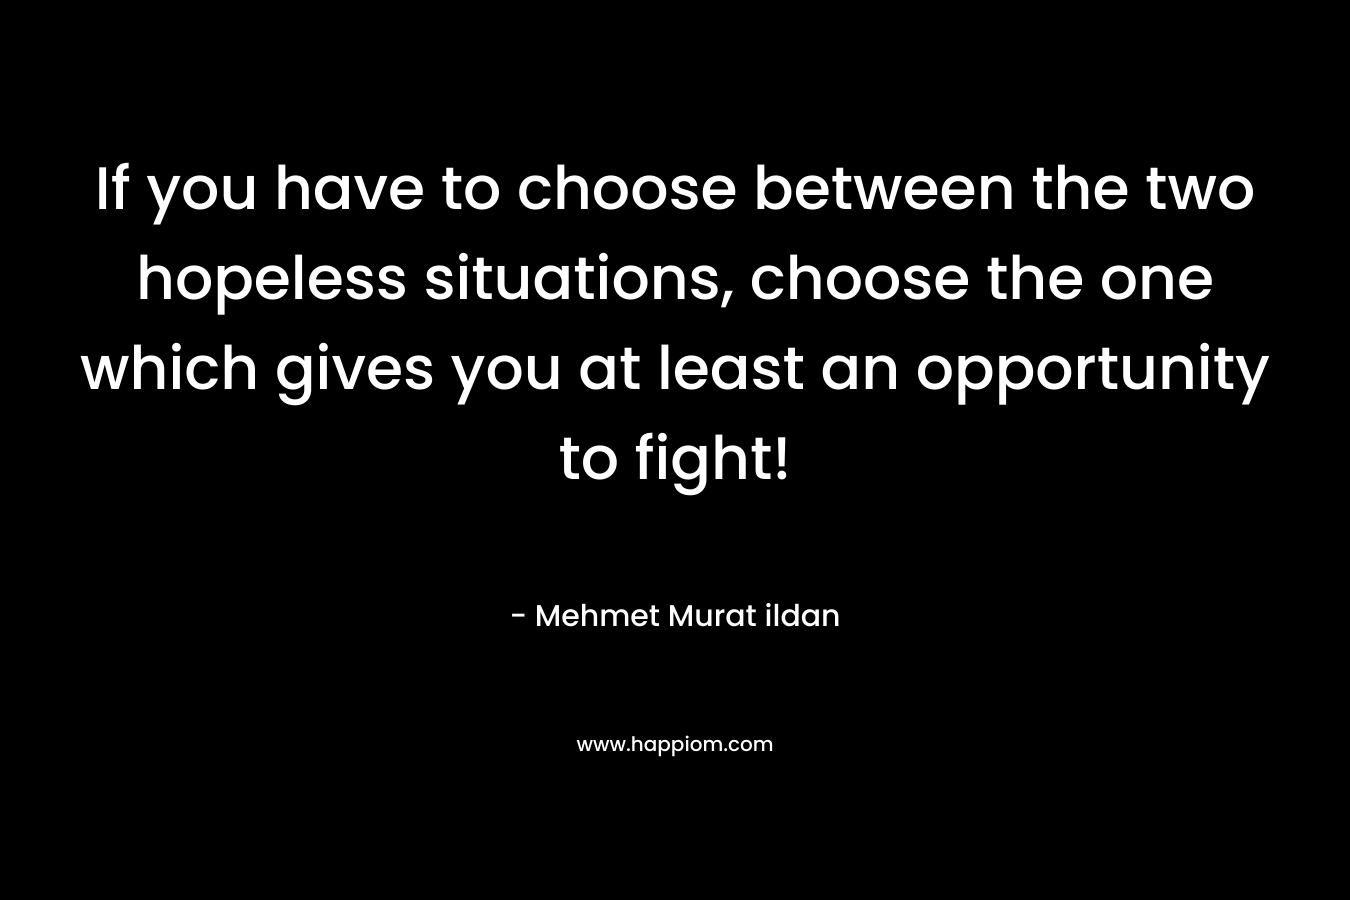 If you have to choose between the two hopeless situations, choose the one which gives you at least an opportunity to fight!